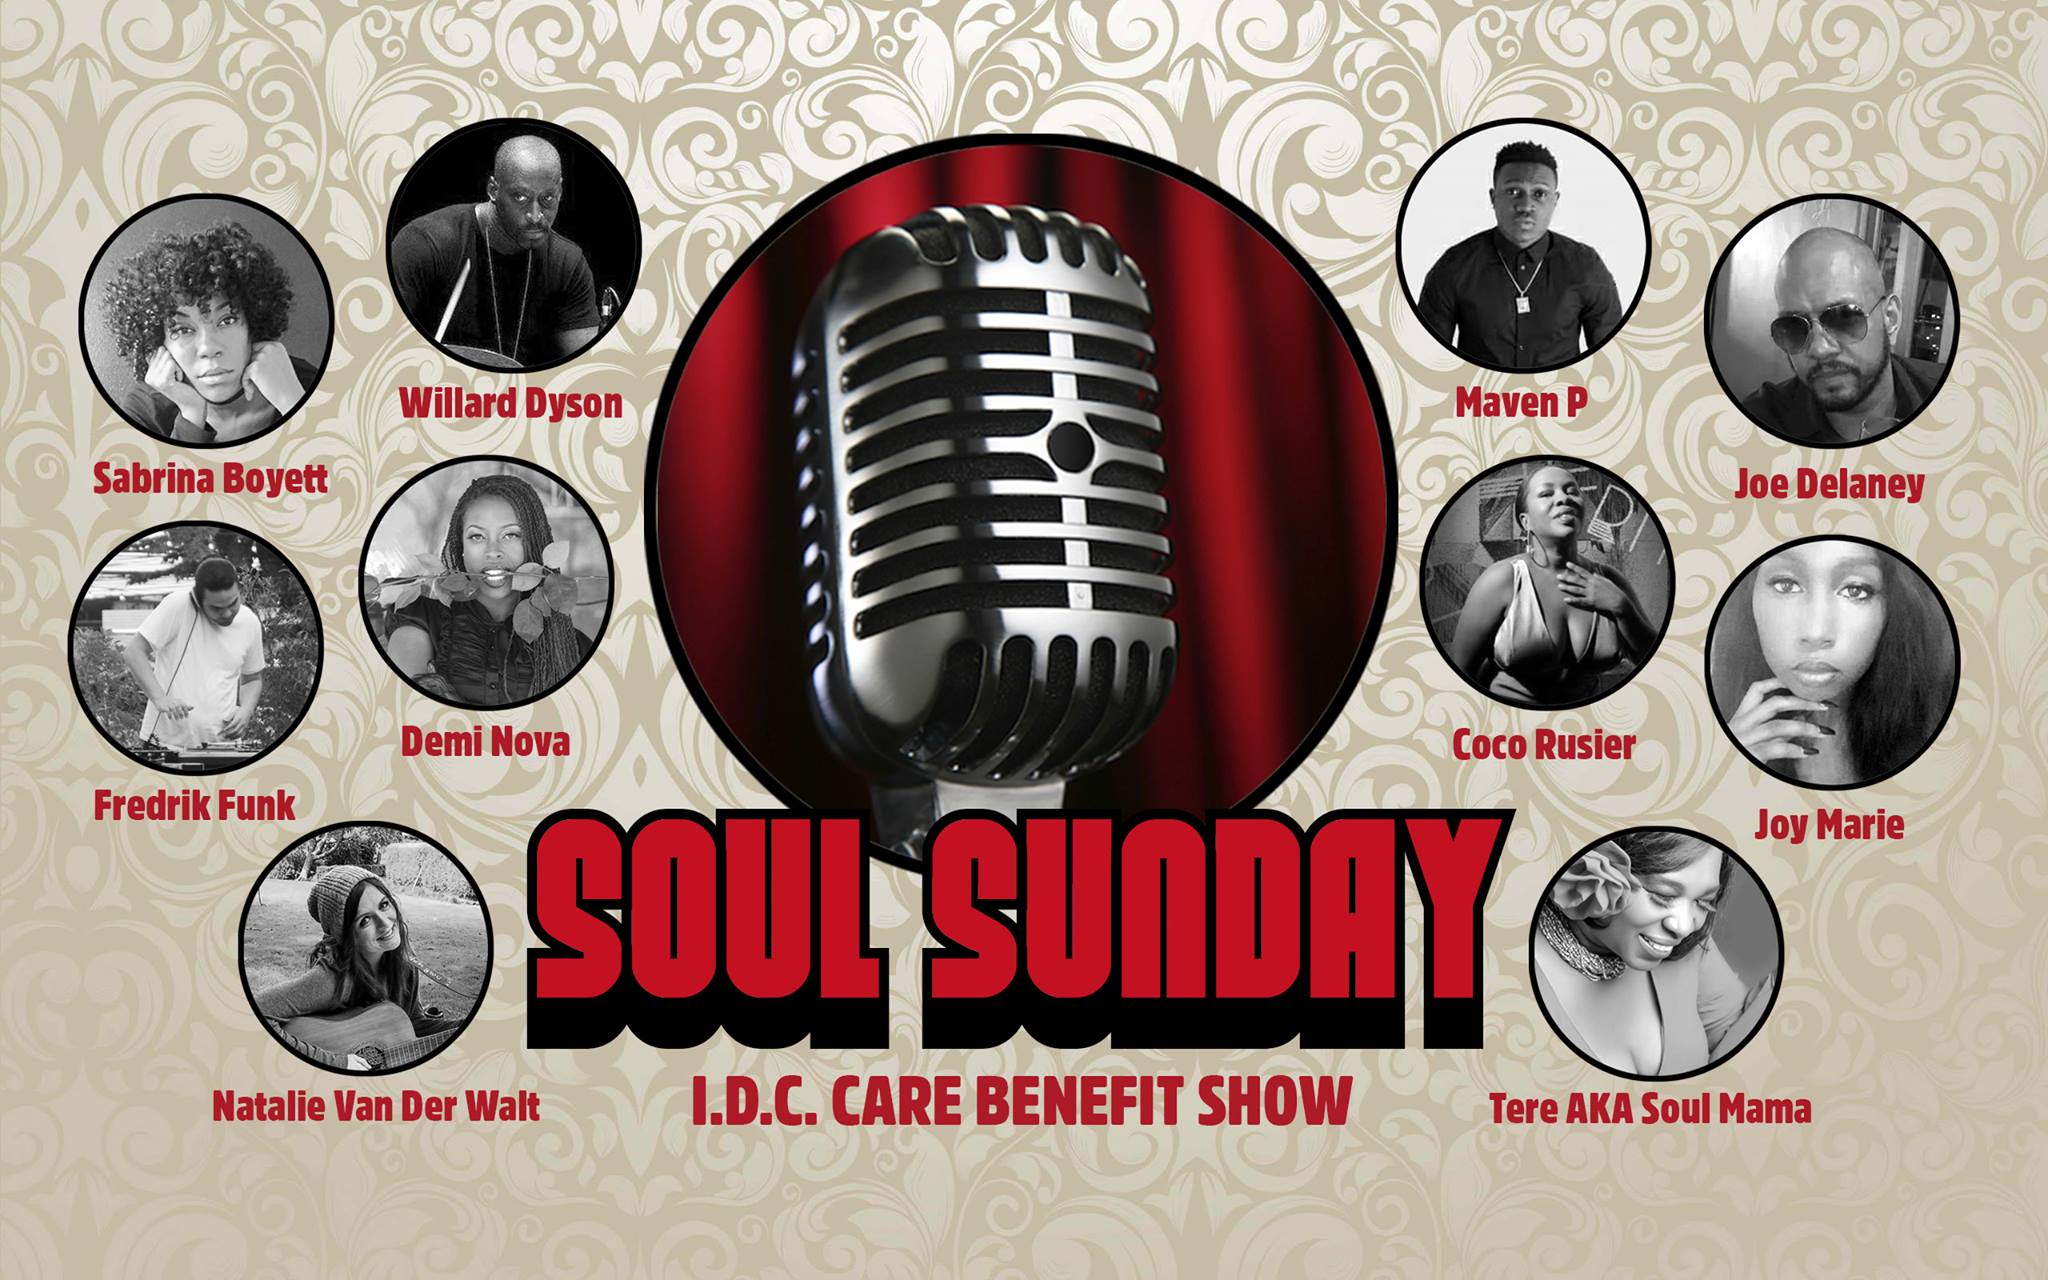 Meet the Talented Stars Behind Our Soul Sunday Fundraiser!